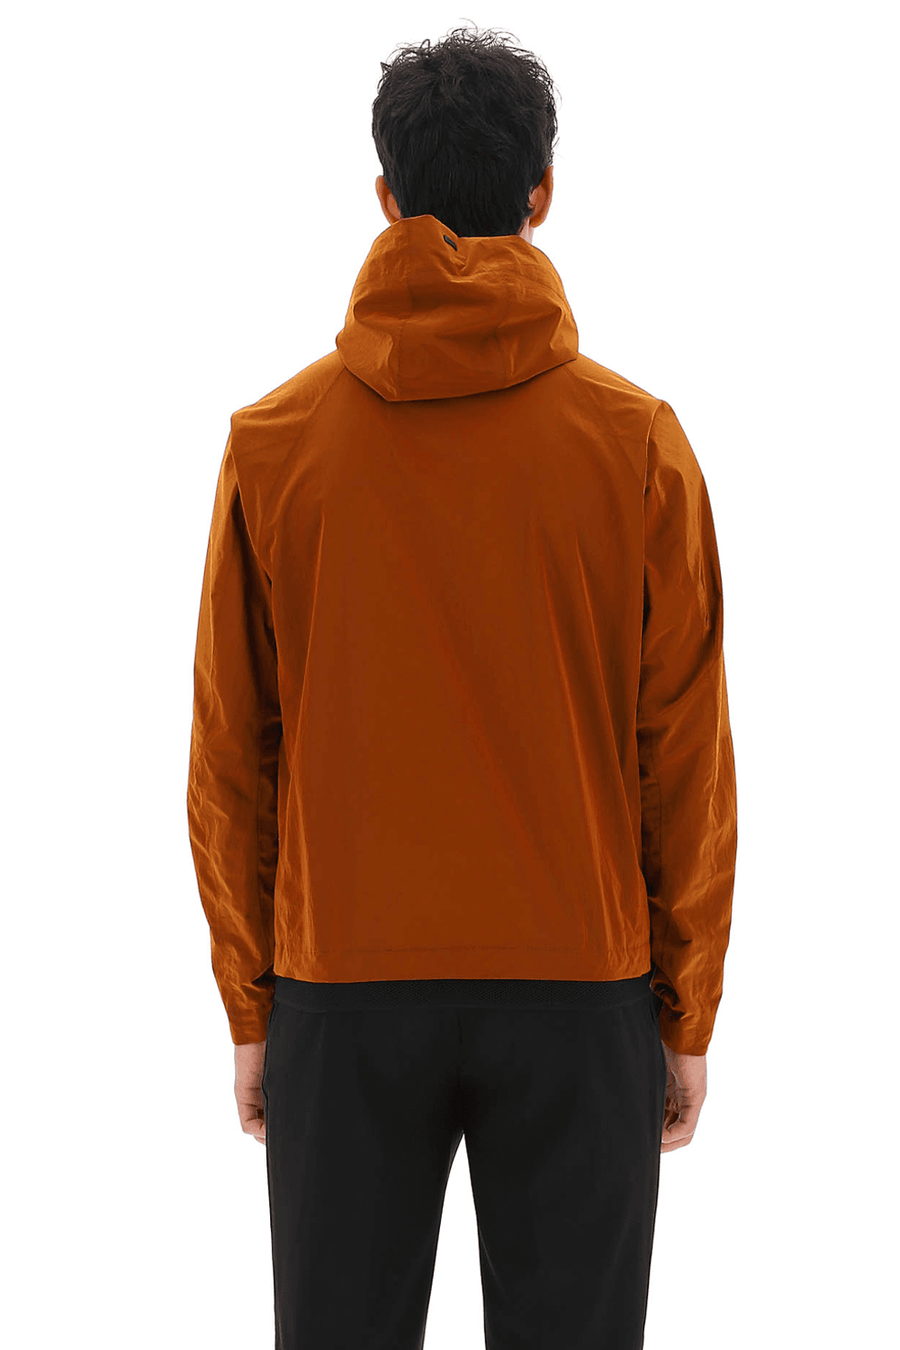 Buy the Herno Relaxed Opalescent Laminar Bomber Jacket in Orange at Intro. Spend £50 for free UK delivery. Official stockists. We ship worldwide.